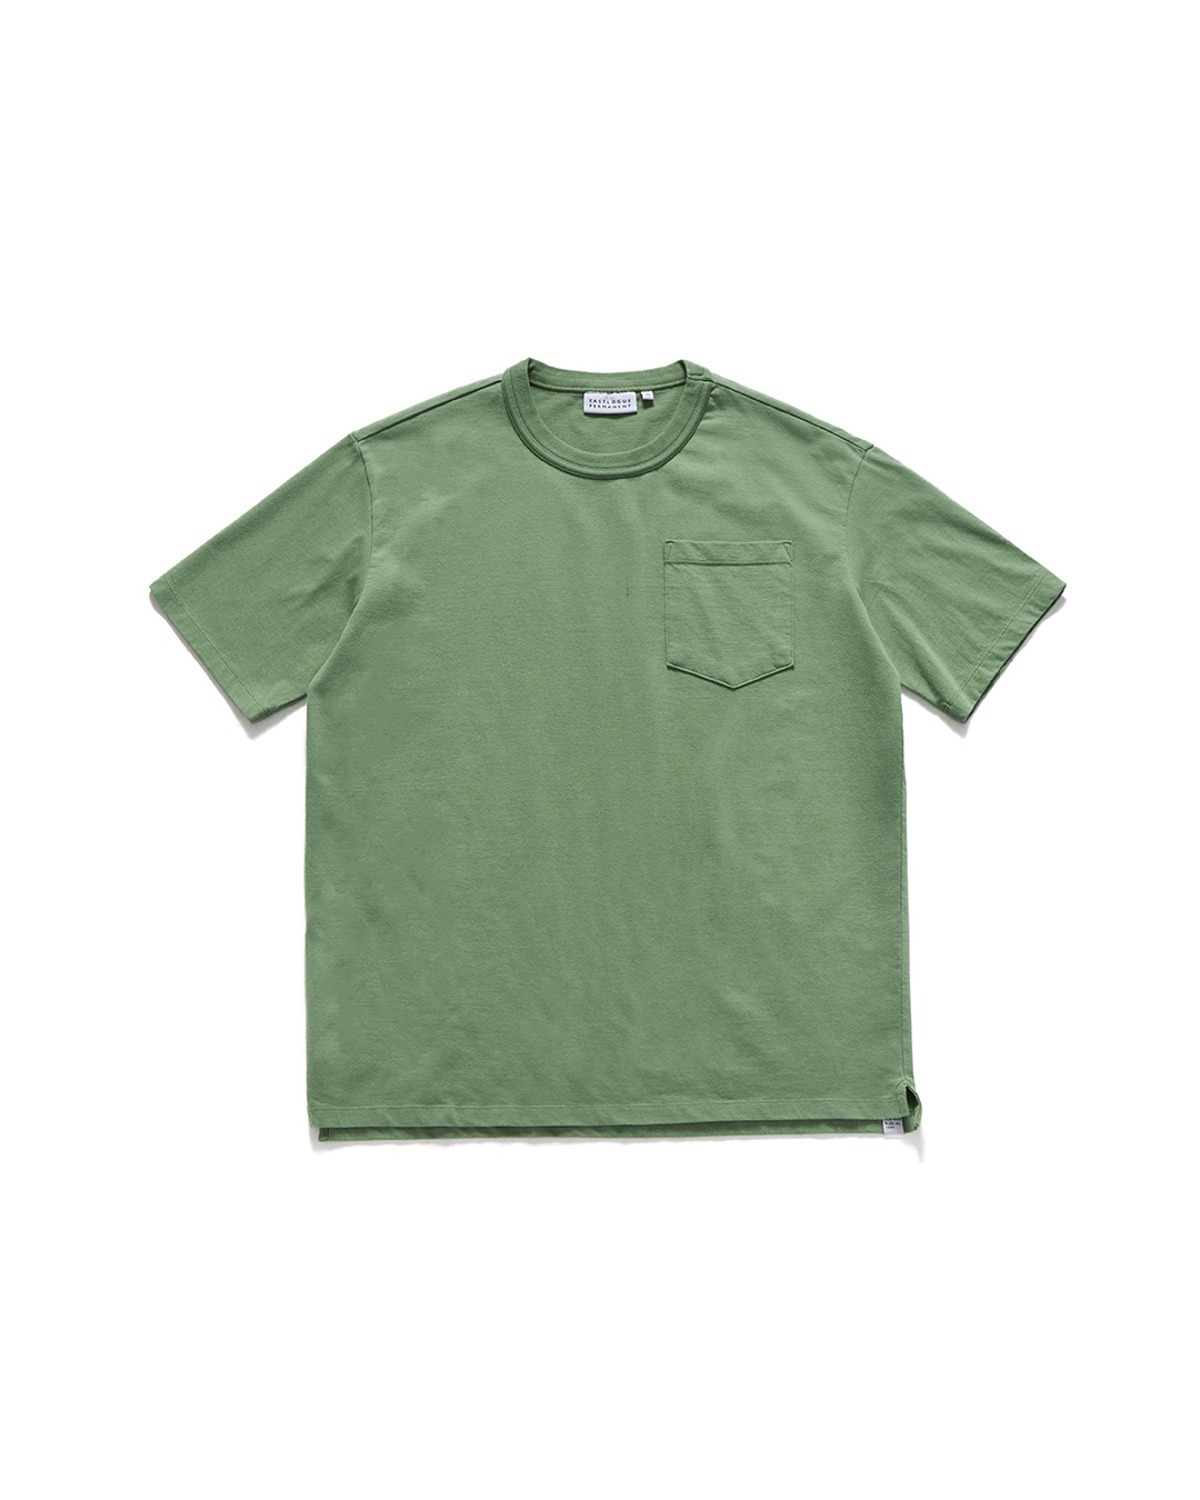 ONE POCKET T-SHIRT (new ver.) / LODEN FOREST